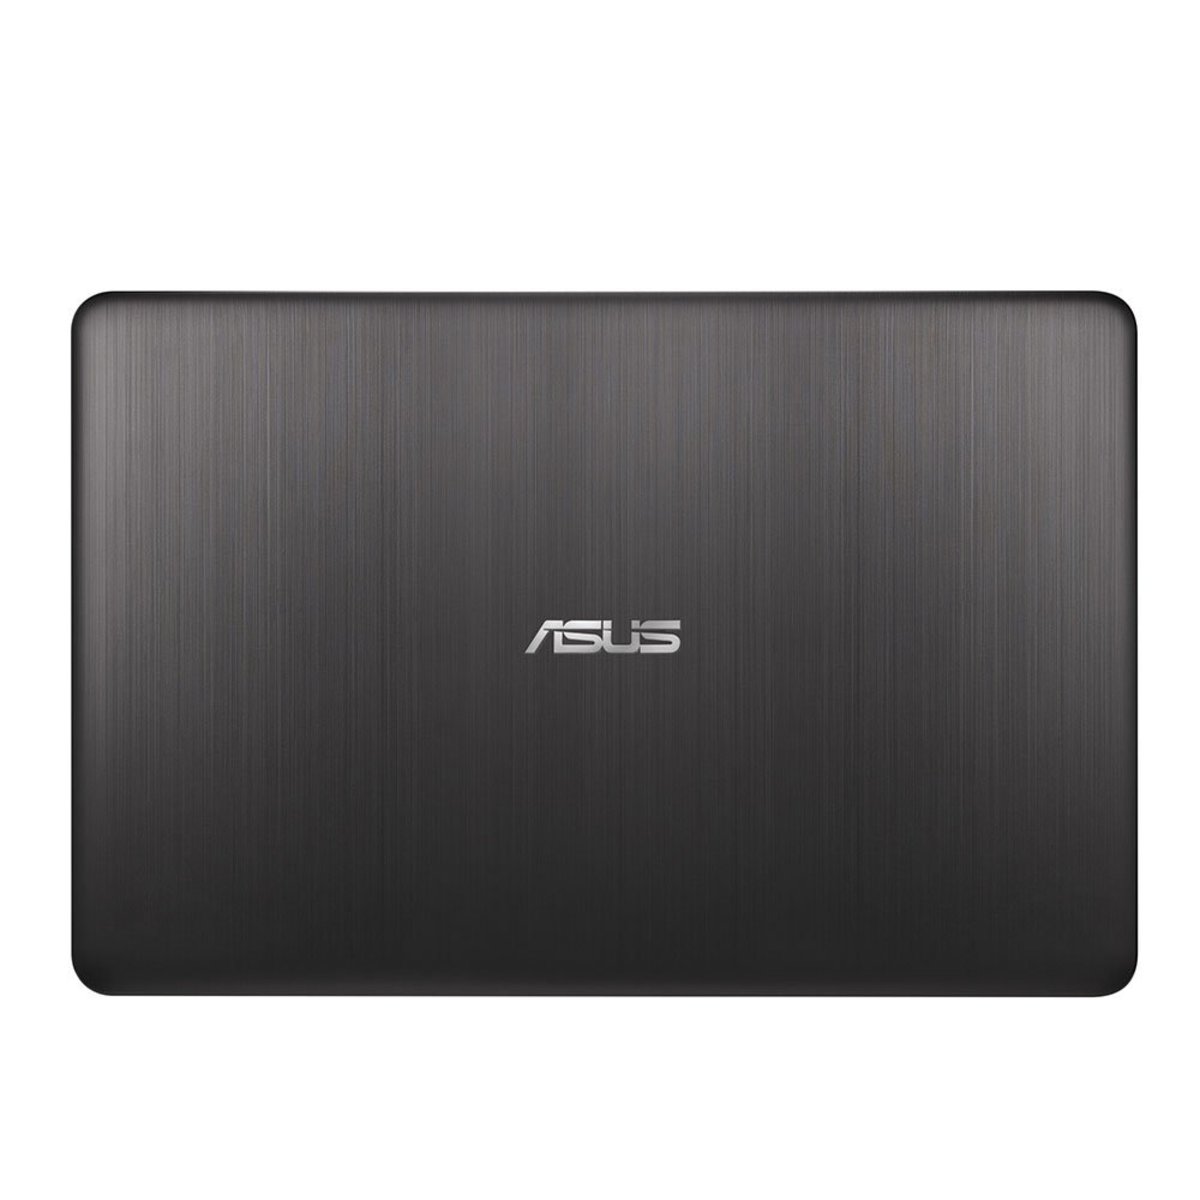 Asus Notebook X540MA-GQ189T Celeron Silver Gradient